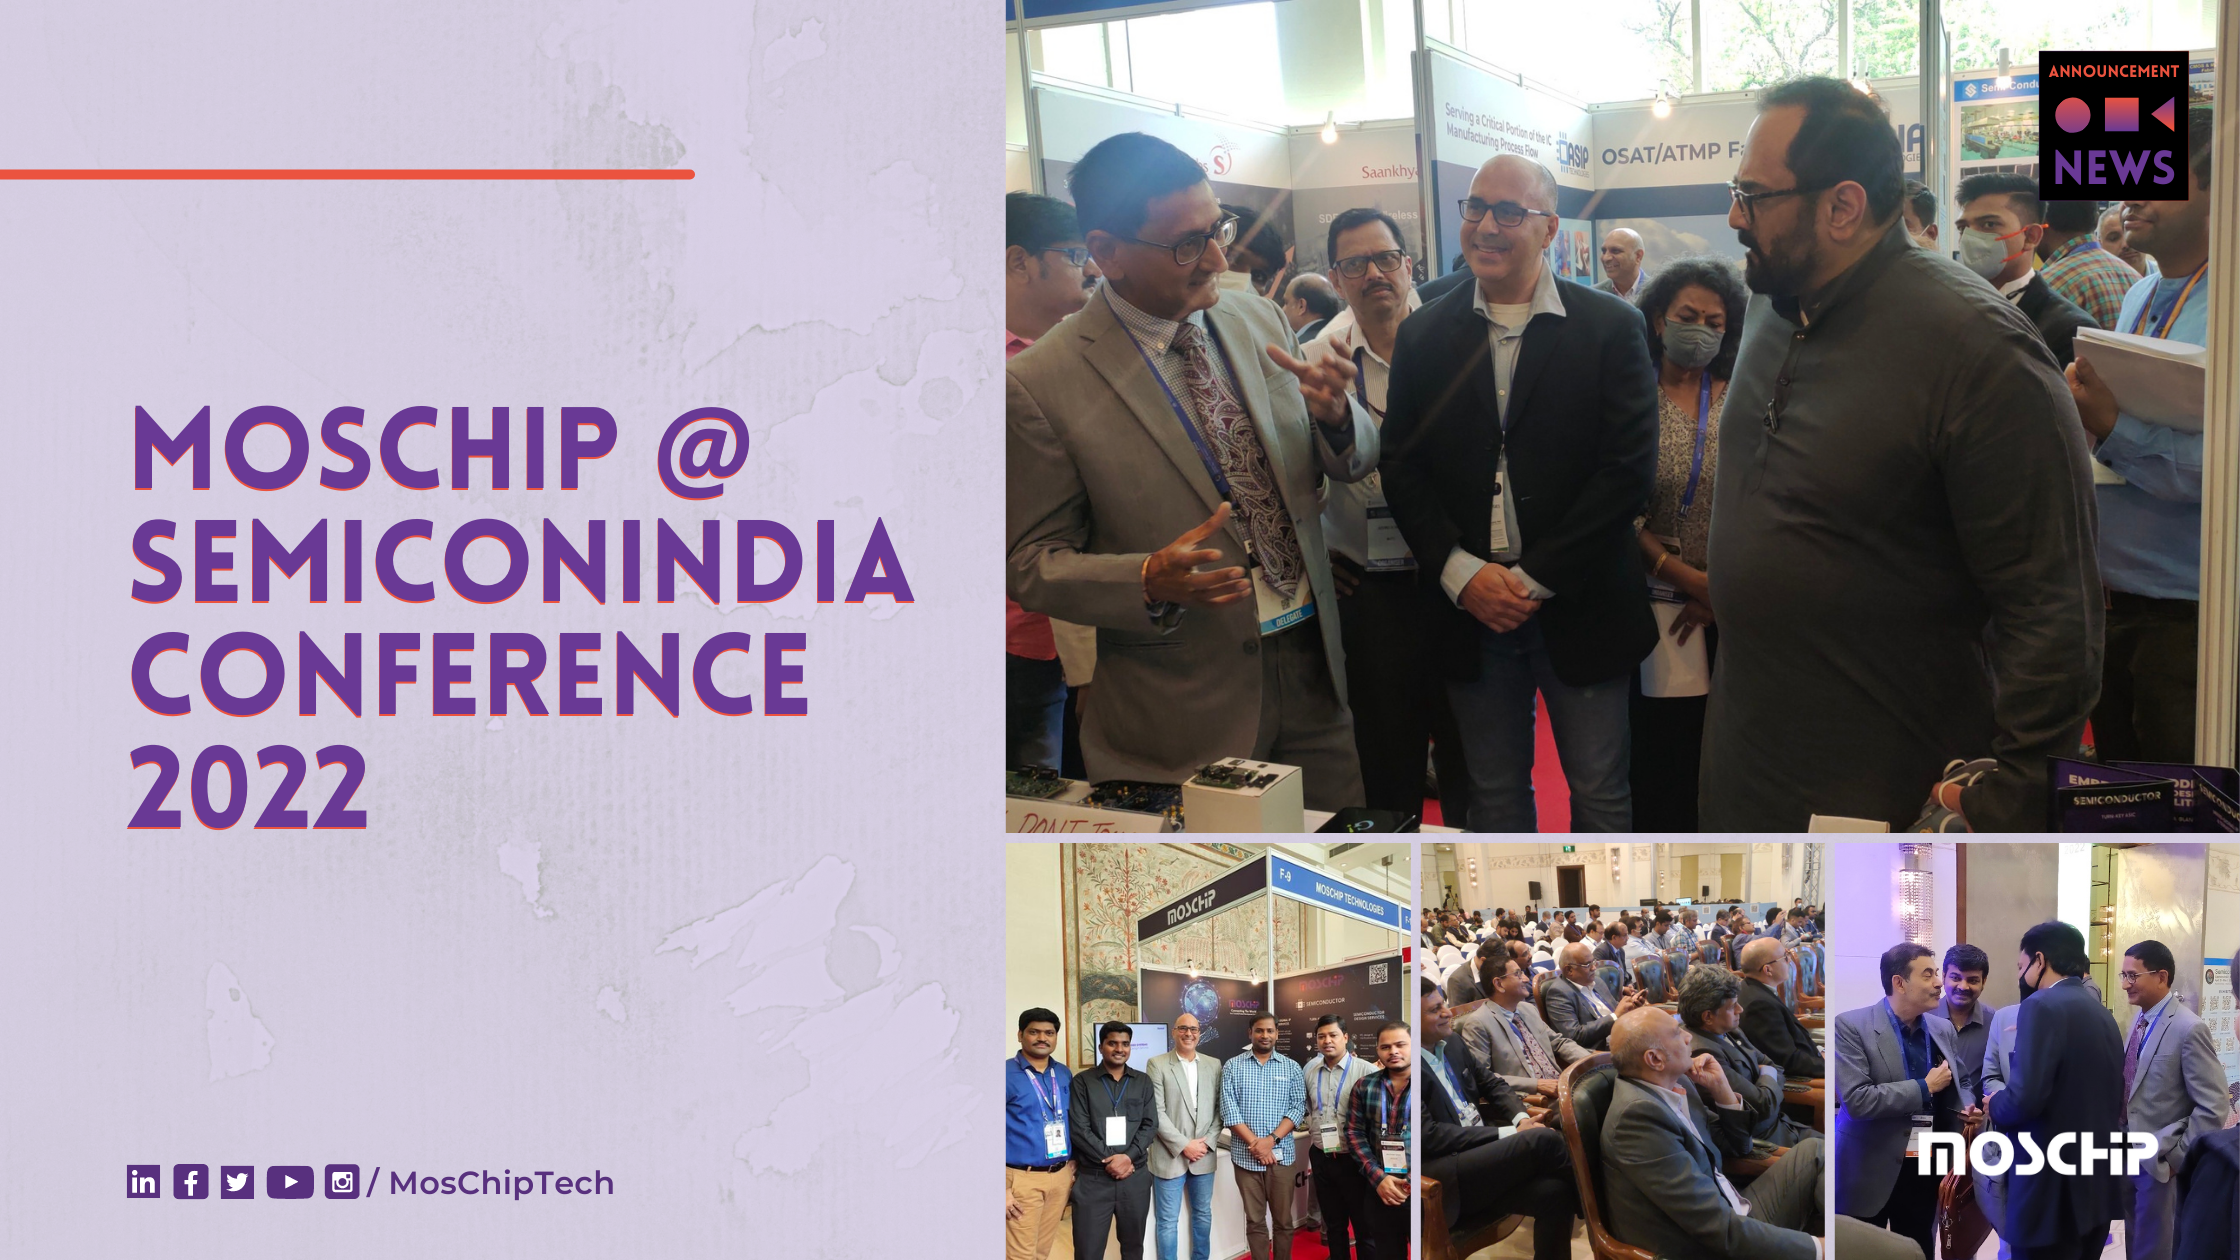 MosChip @SemiconIndia Conference